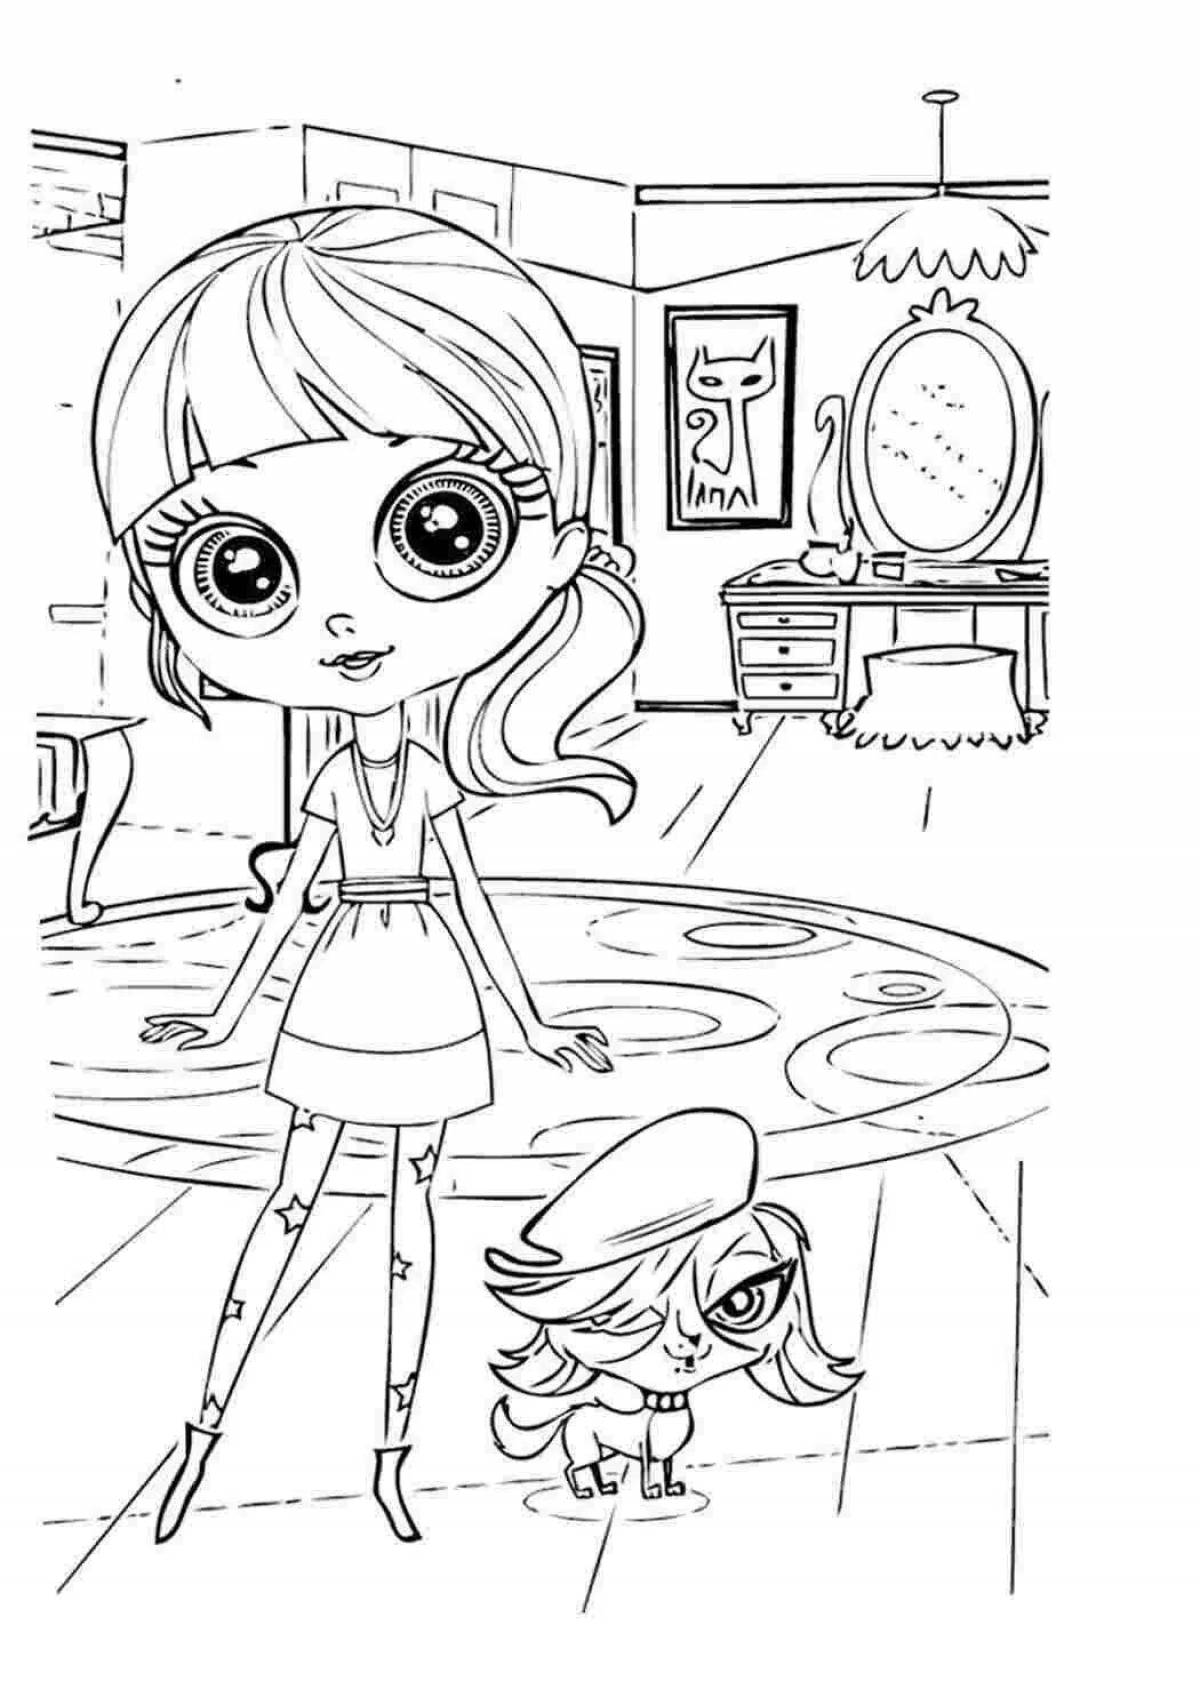 Coloring page adorable shop for girls